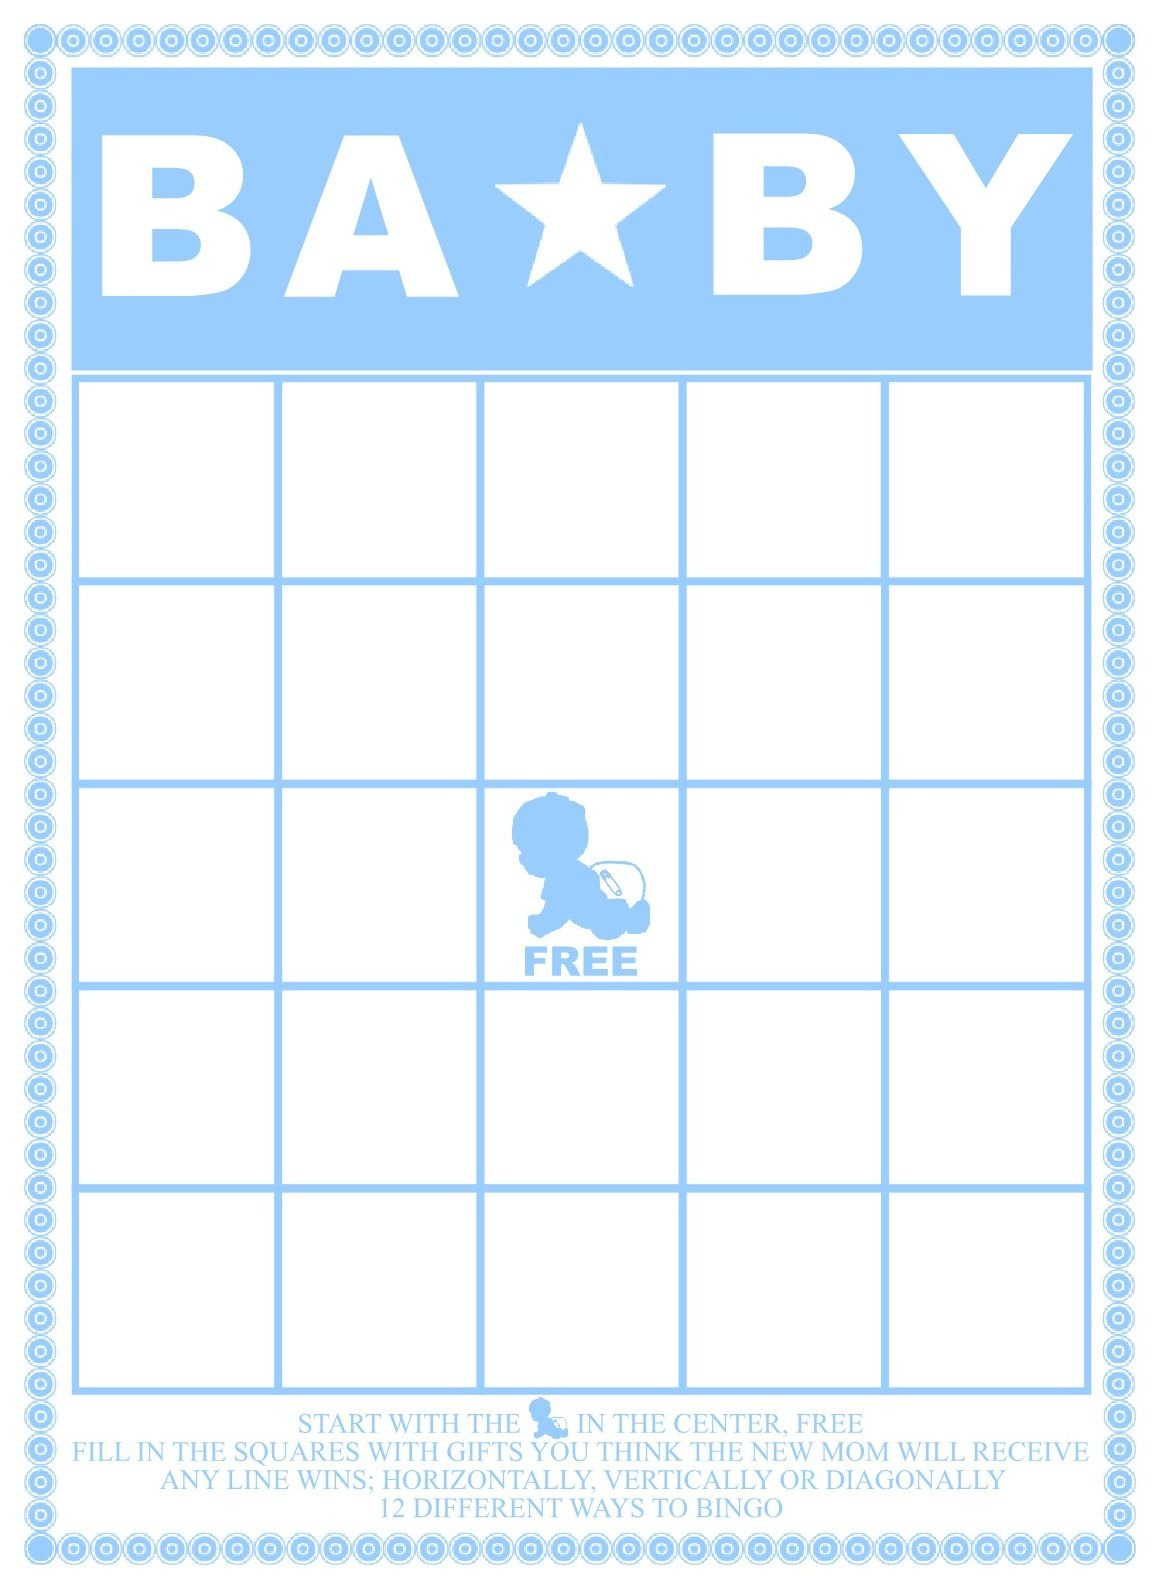 29 Sets Of Free Baby Shower Bingo Cards Pertaining To Baby Bingo - Printable Baby Shower Bingo Games Free